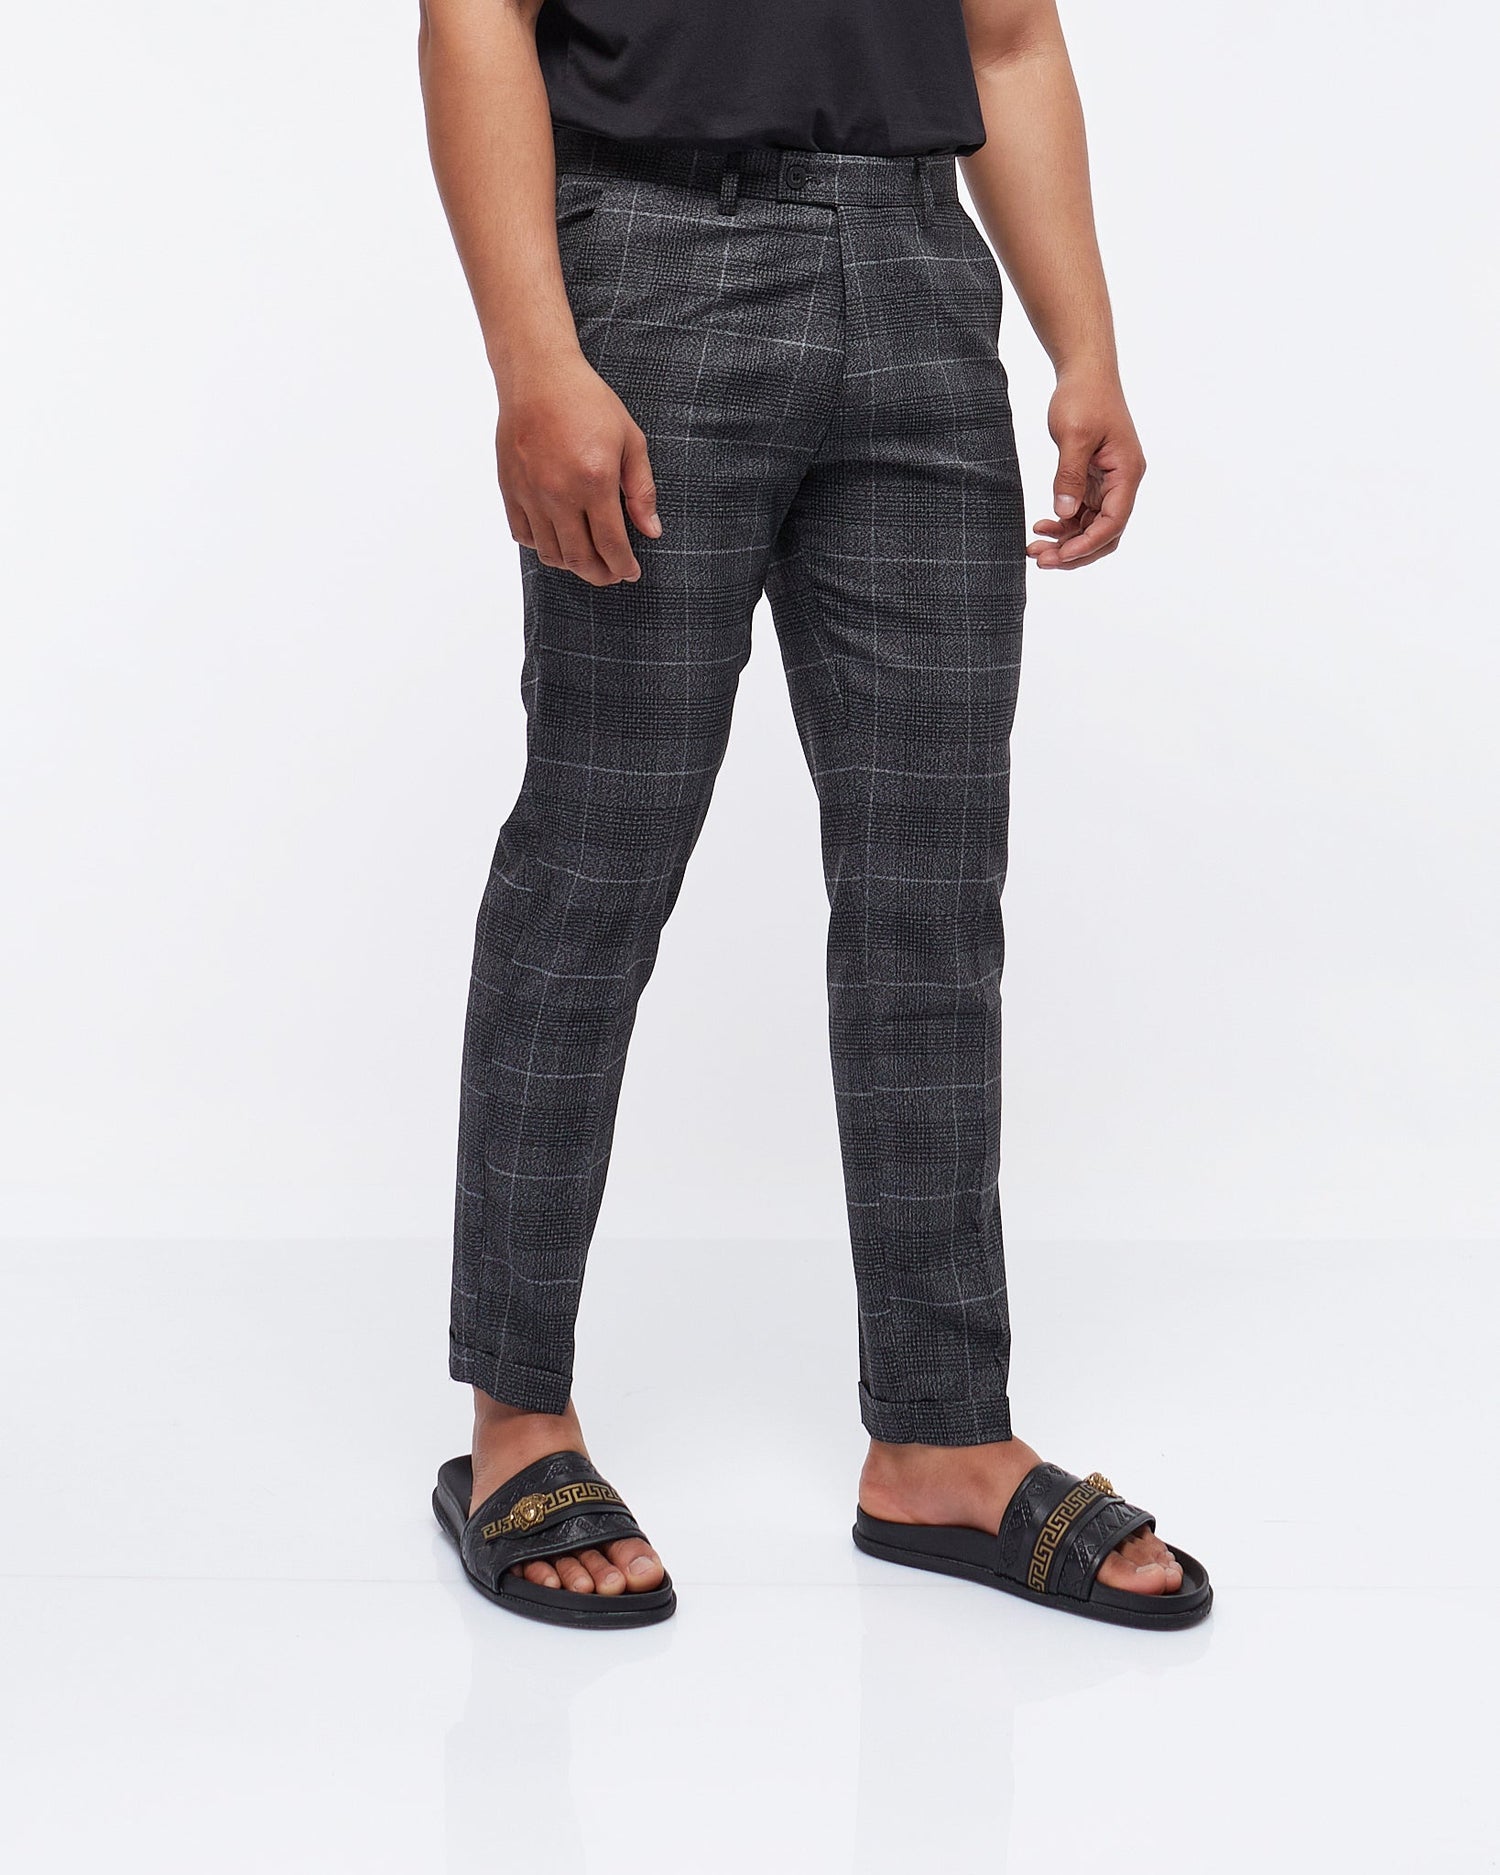 MOI OUTFIT-Checked Casual Men Slim Fit Pants 23.90